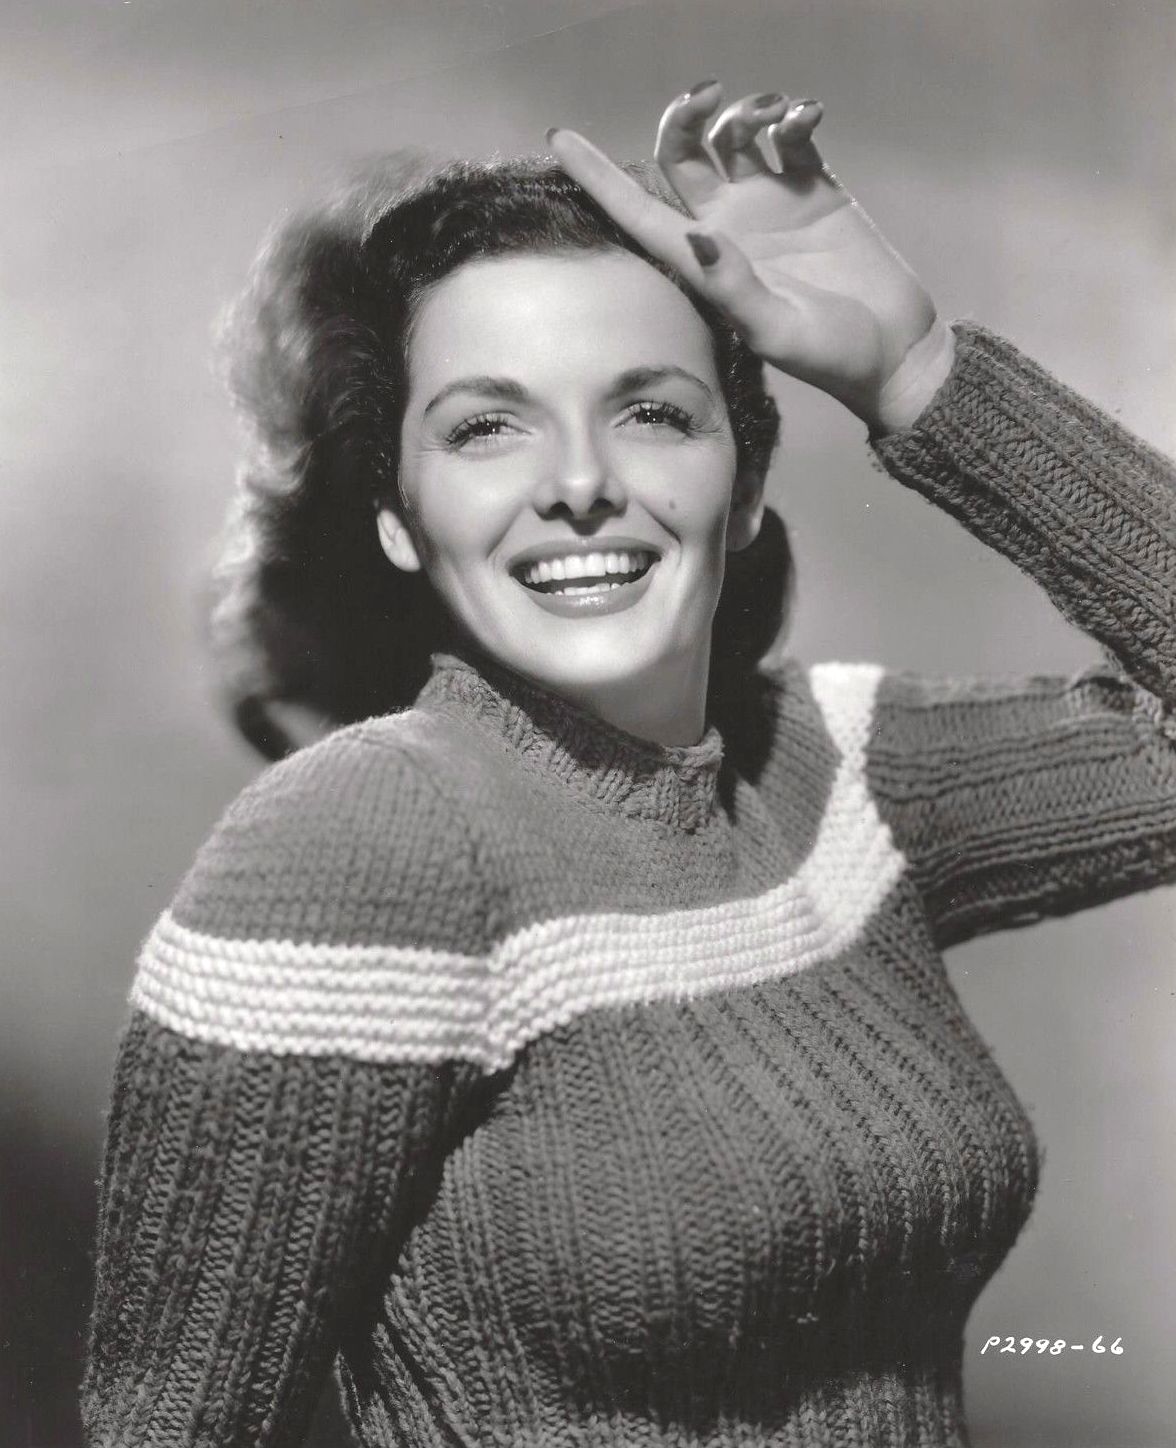 JANE RUSSELL